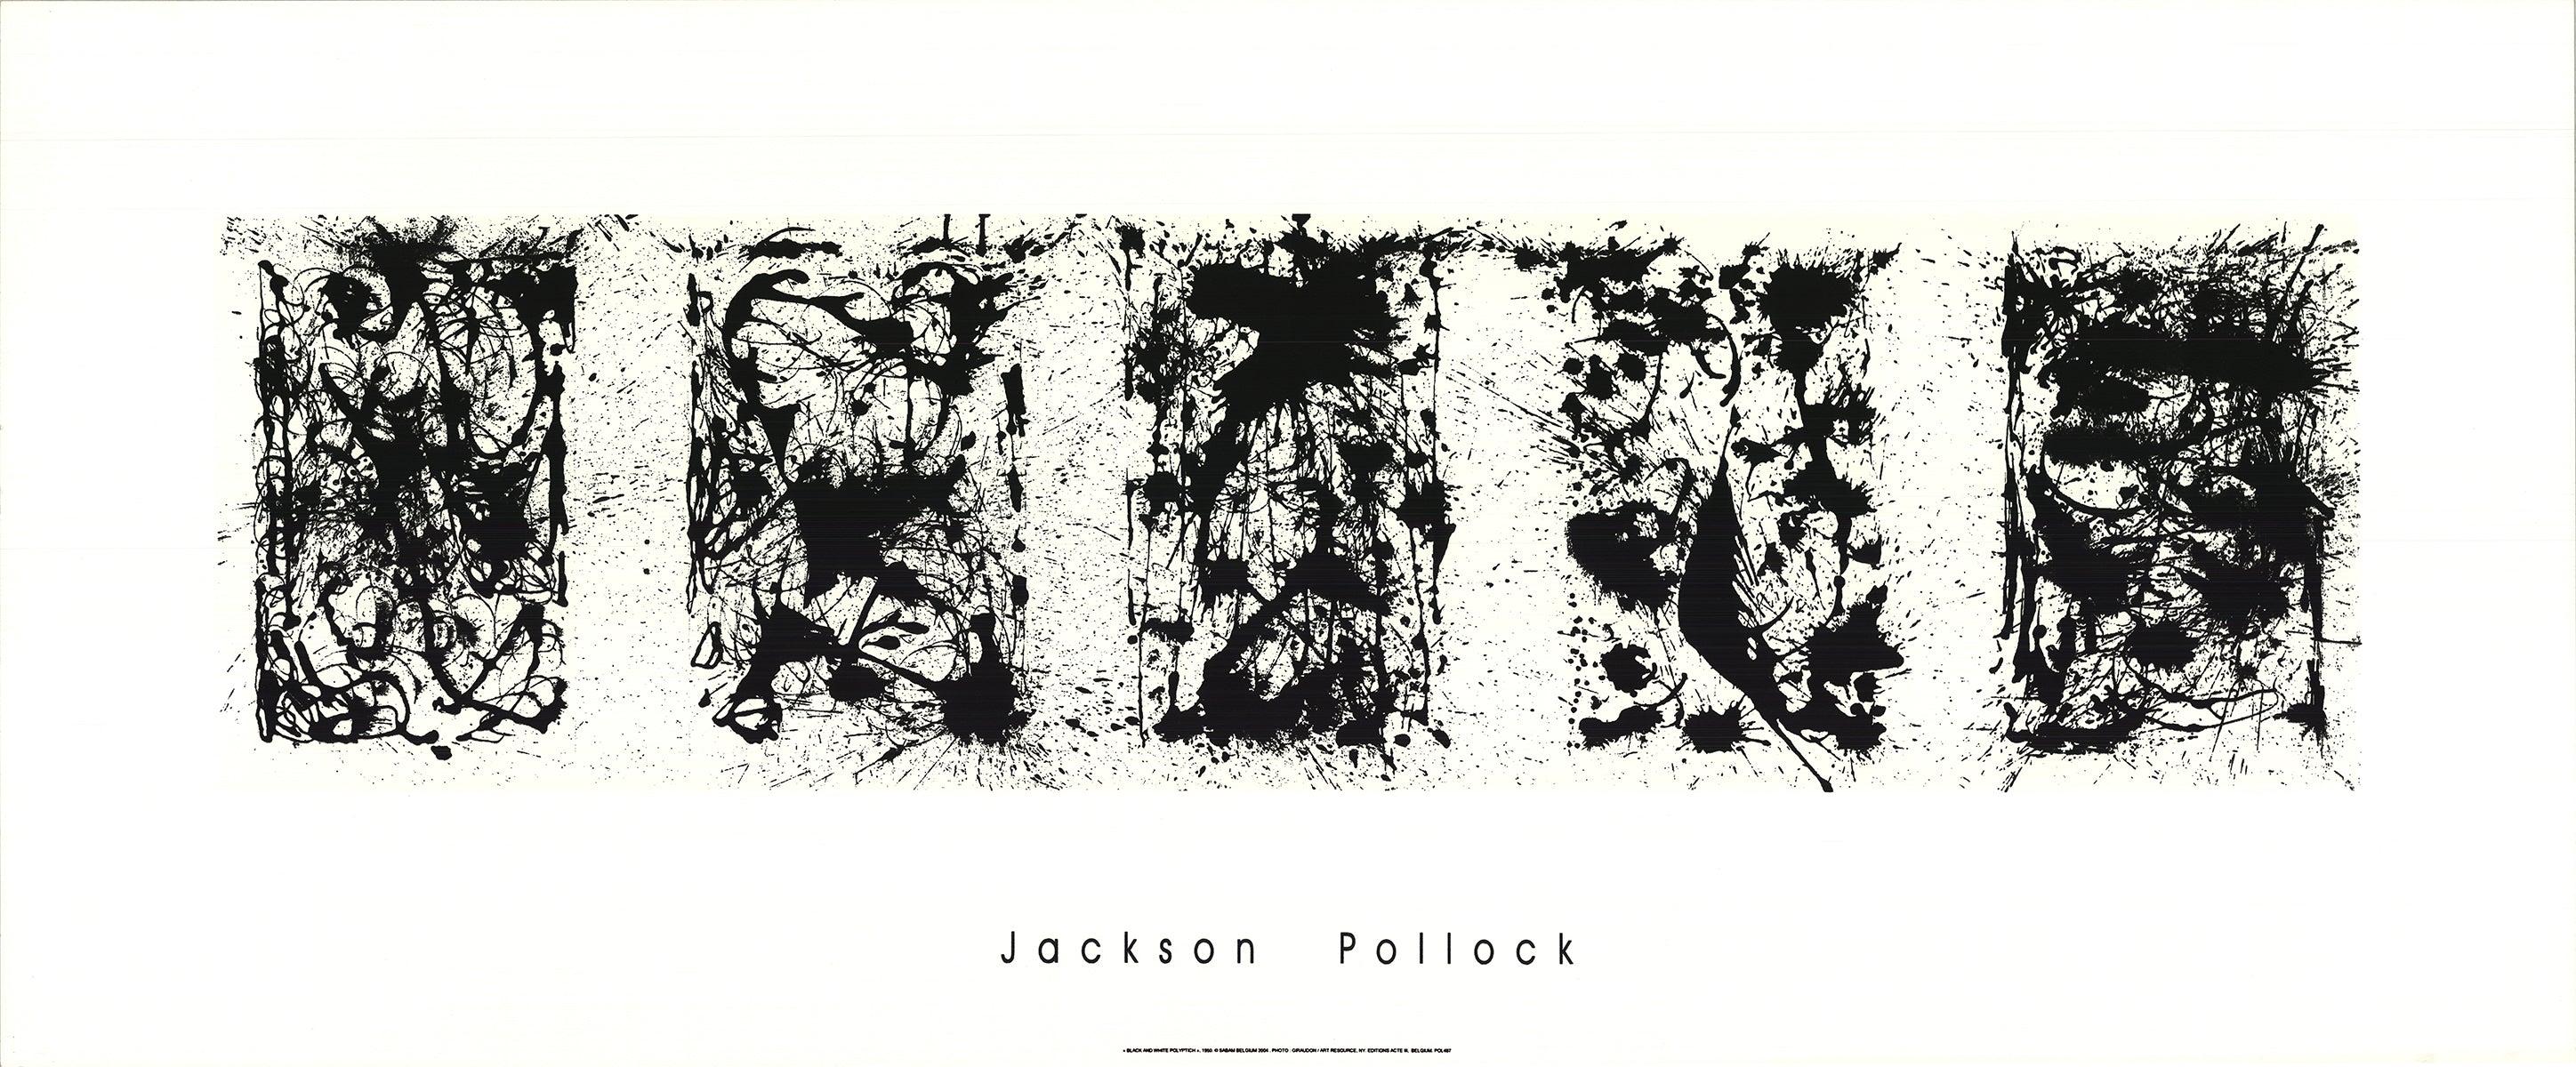 The "Black and White Polyptych" poster by Jackson Pollock, published by Acte III in 2004, is a testament to Pollock's enduring influence and the timeless appeal of his work. Printed on heavy mat cover paper, this high-quality reproduction captures